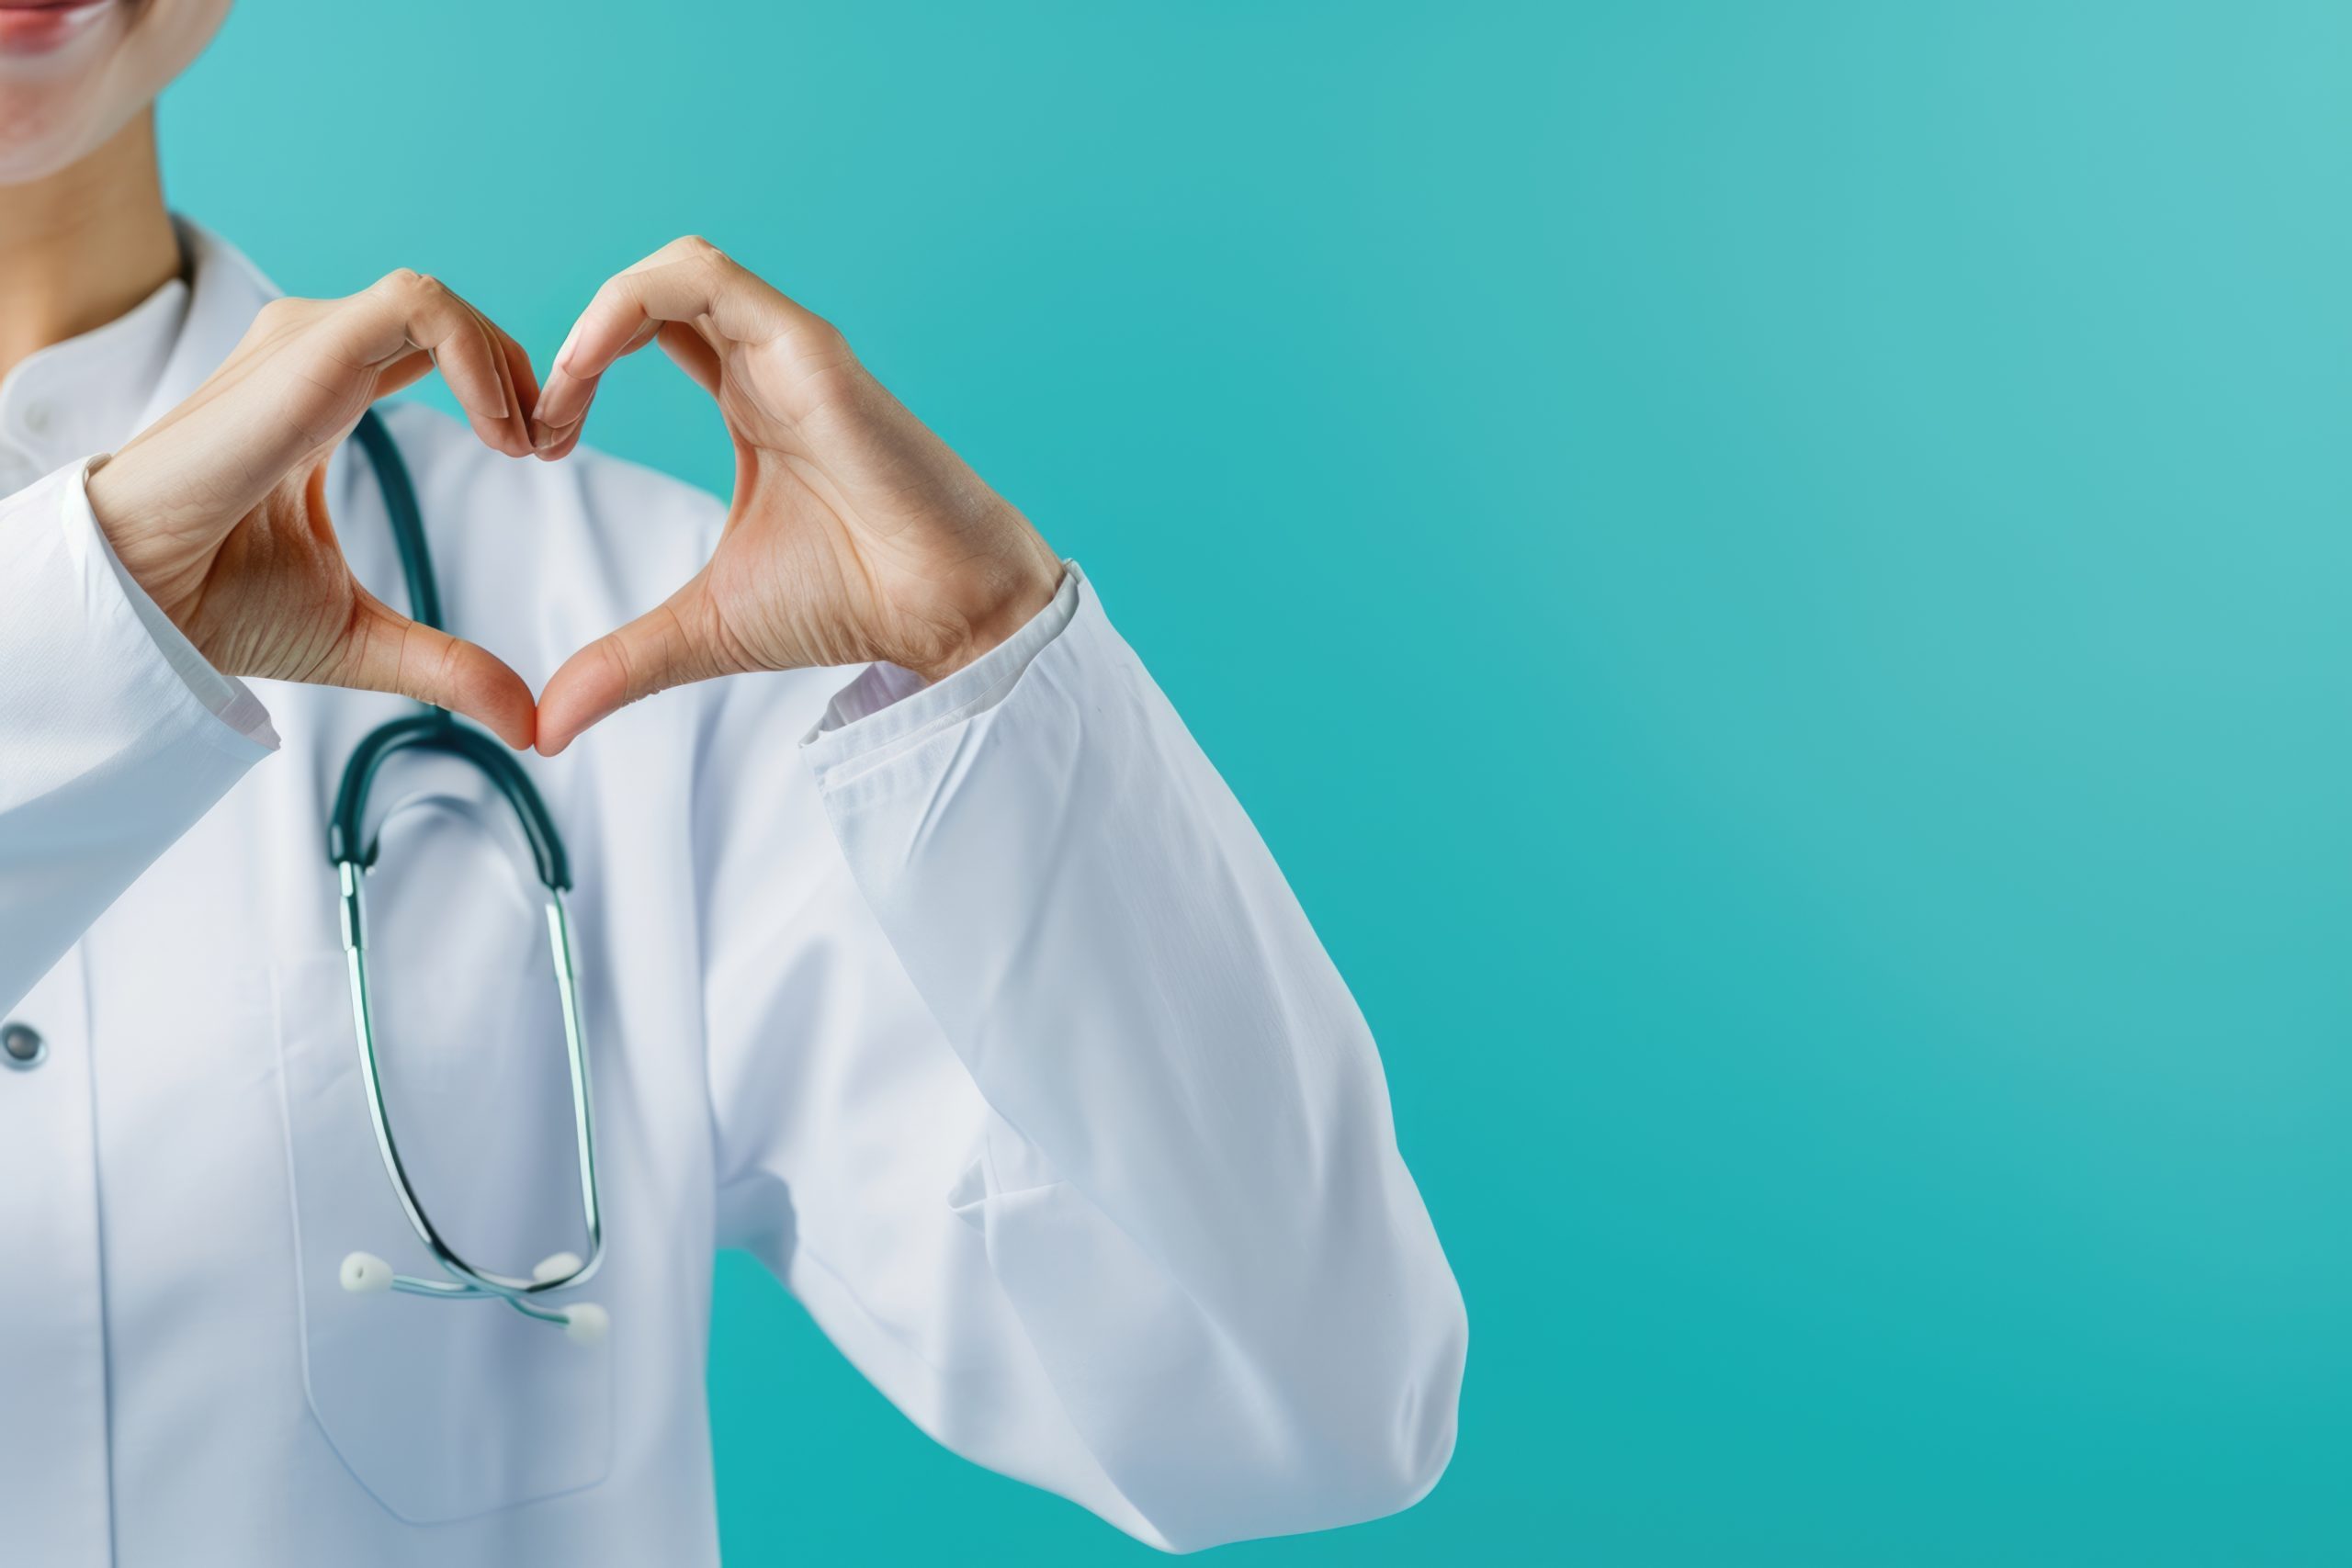 A patient-centric healthcare professional in a white coat with a stethoscope, forming a heart shape with their hands over a turquoise background.